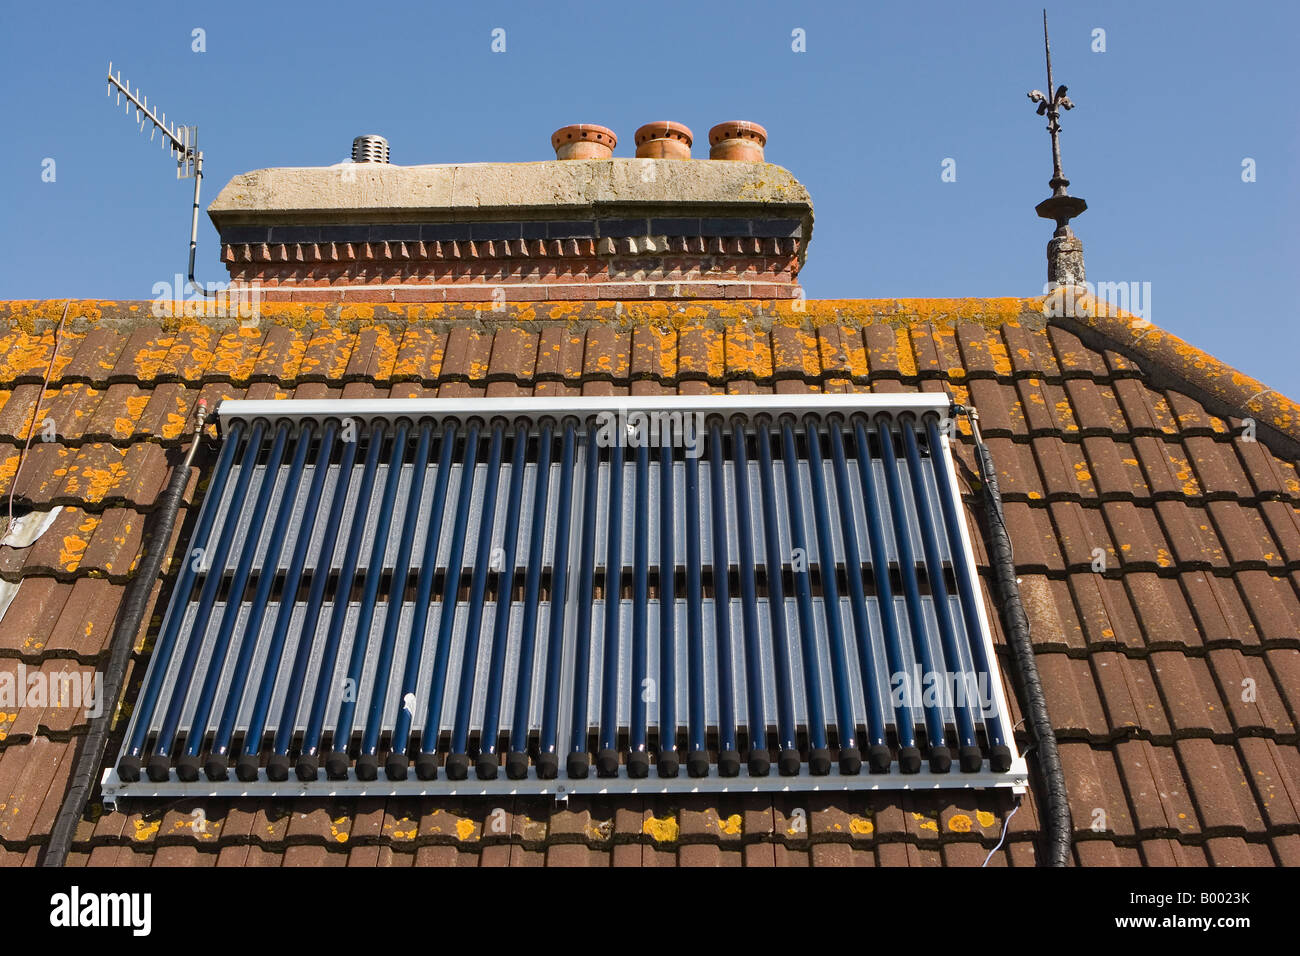 Thermal evacuated solar collecting tubes to power hot water system in photographers own home Stock Photo